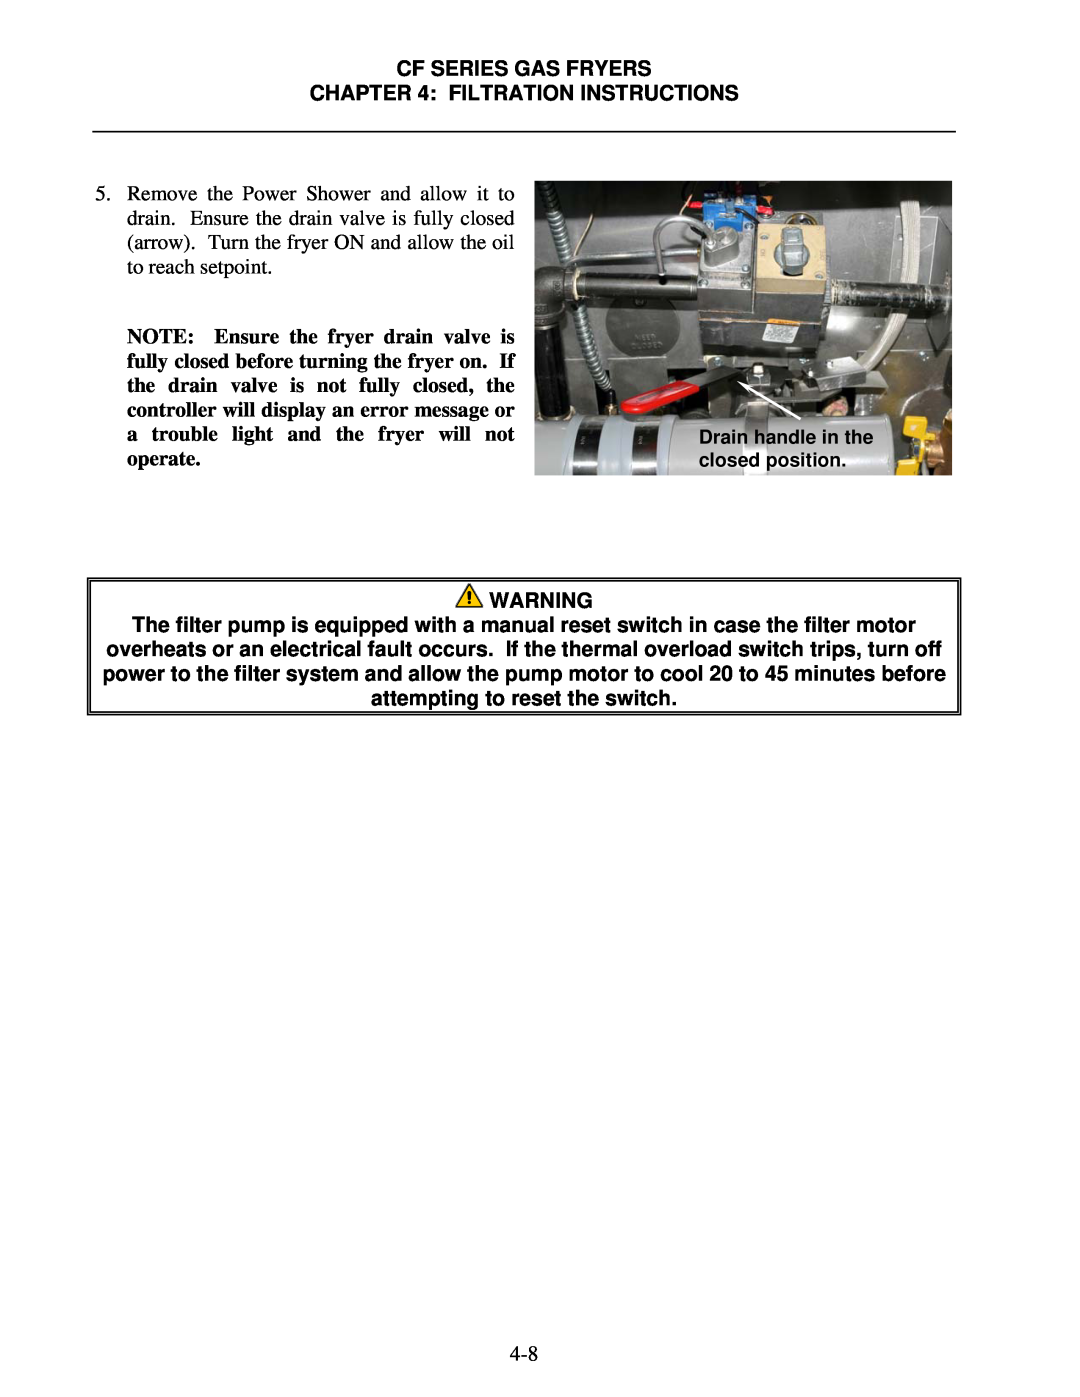 Frymaster FMCF operation manual Drain handle in the closed position 